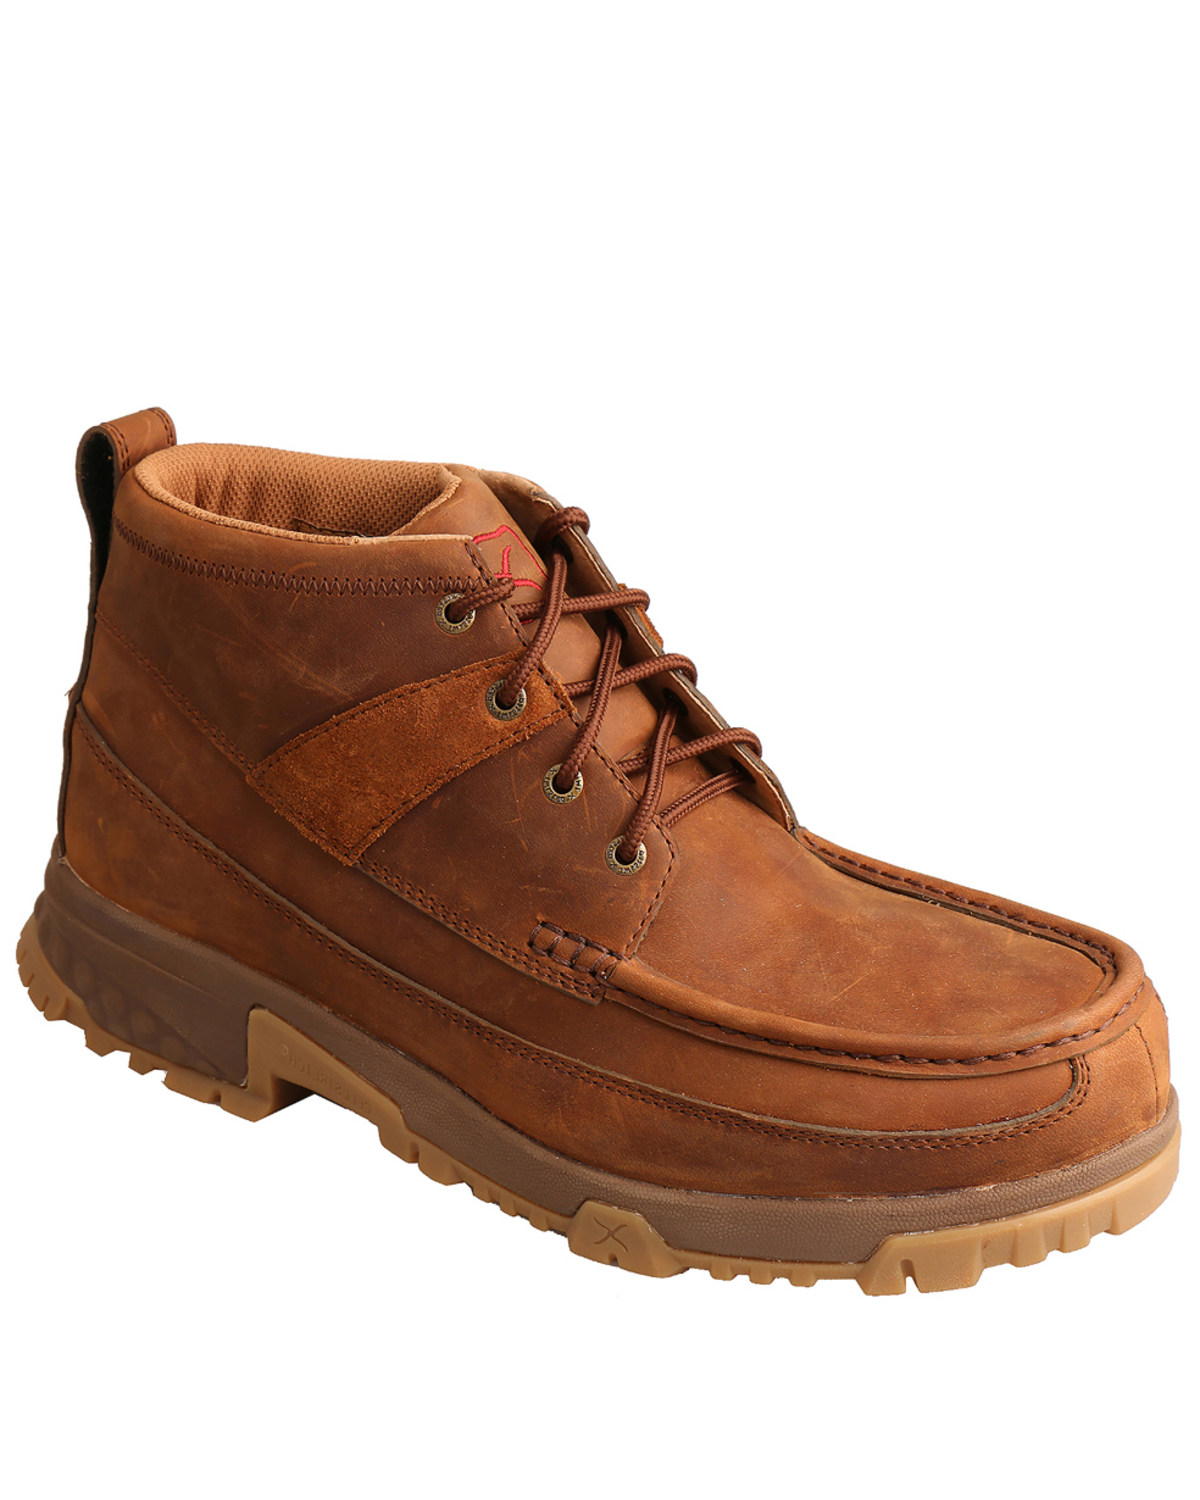 Twisted X Men's CellStretch Lace-Up Work Boots - Composite Toe